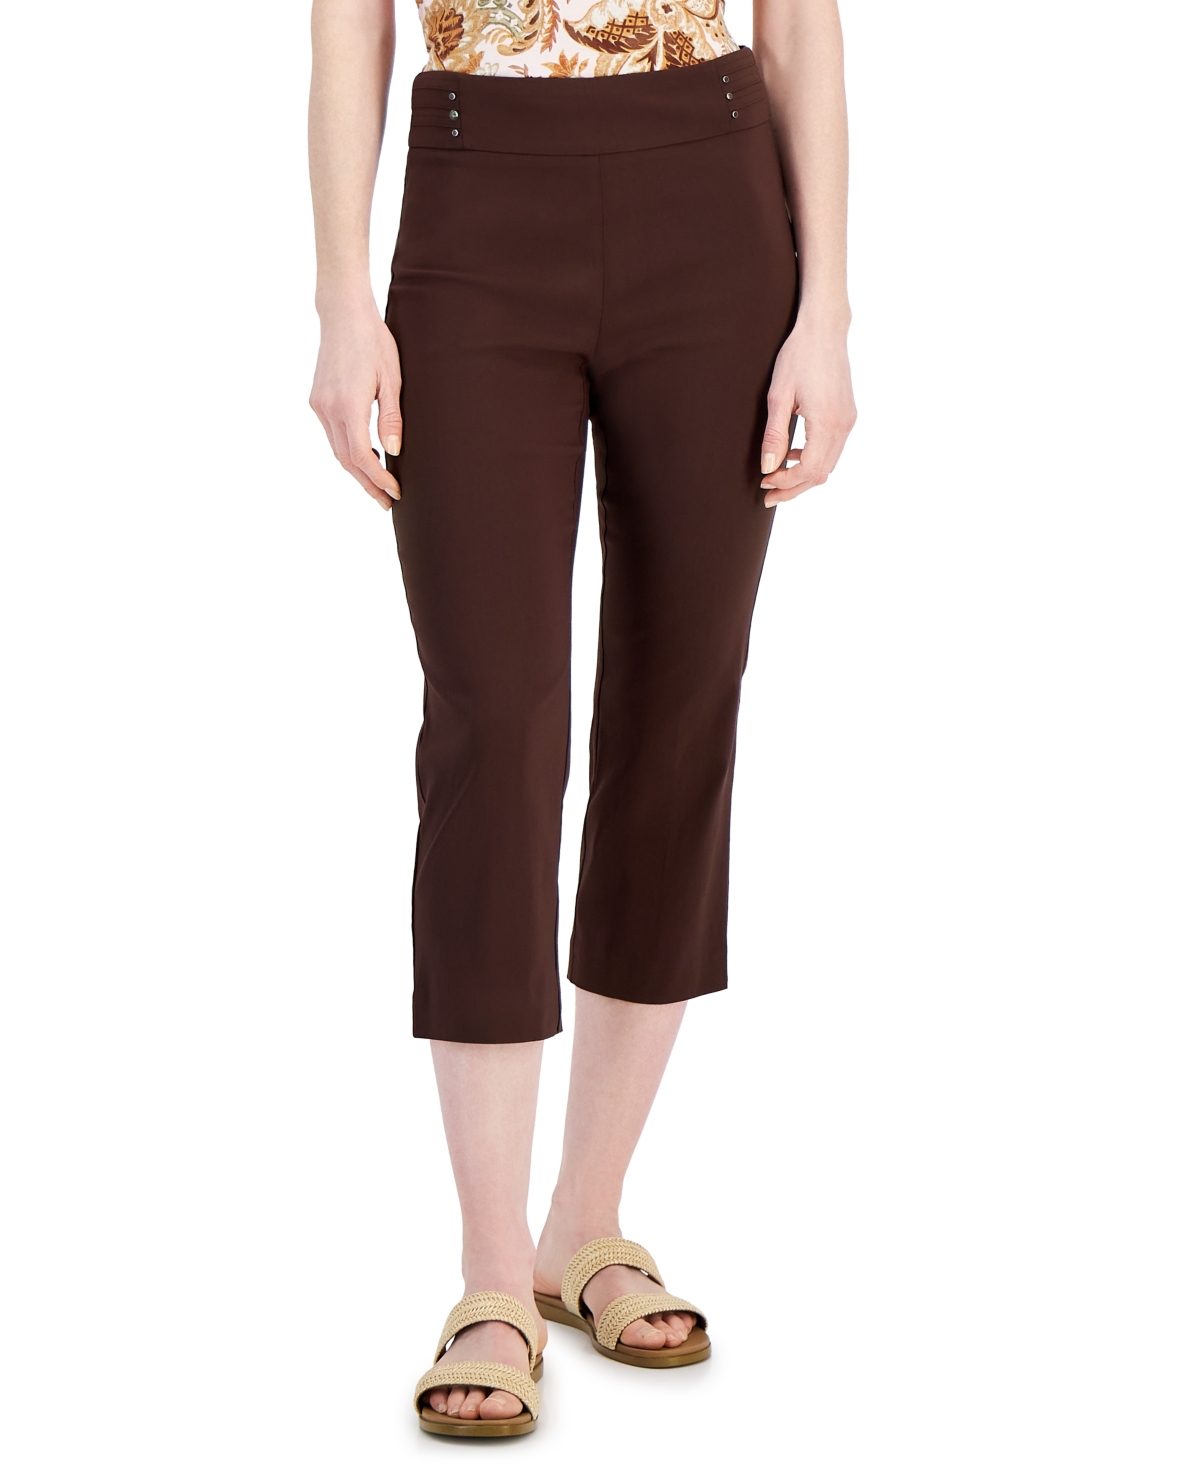 Women's Pull On Slim-Fit Rivet Detail Cropped Pants, Created for Macy's - Phlox Pink